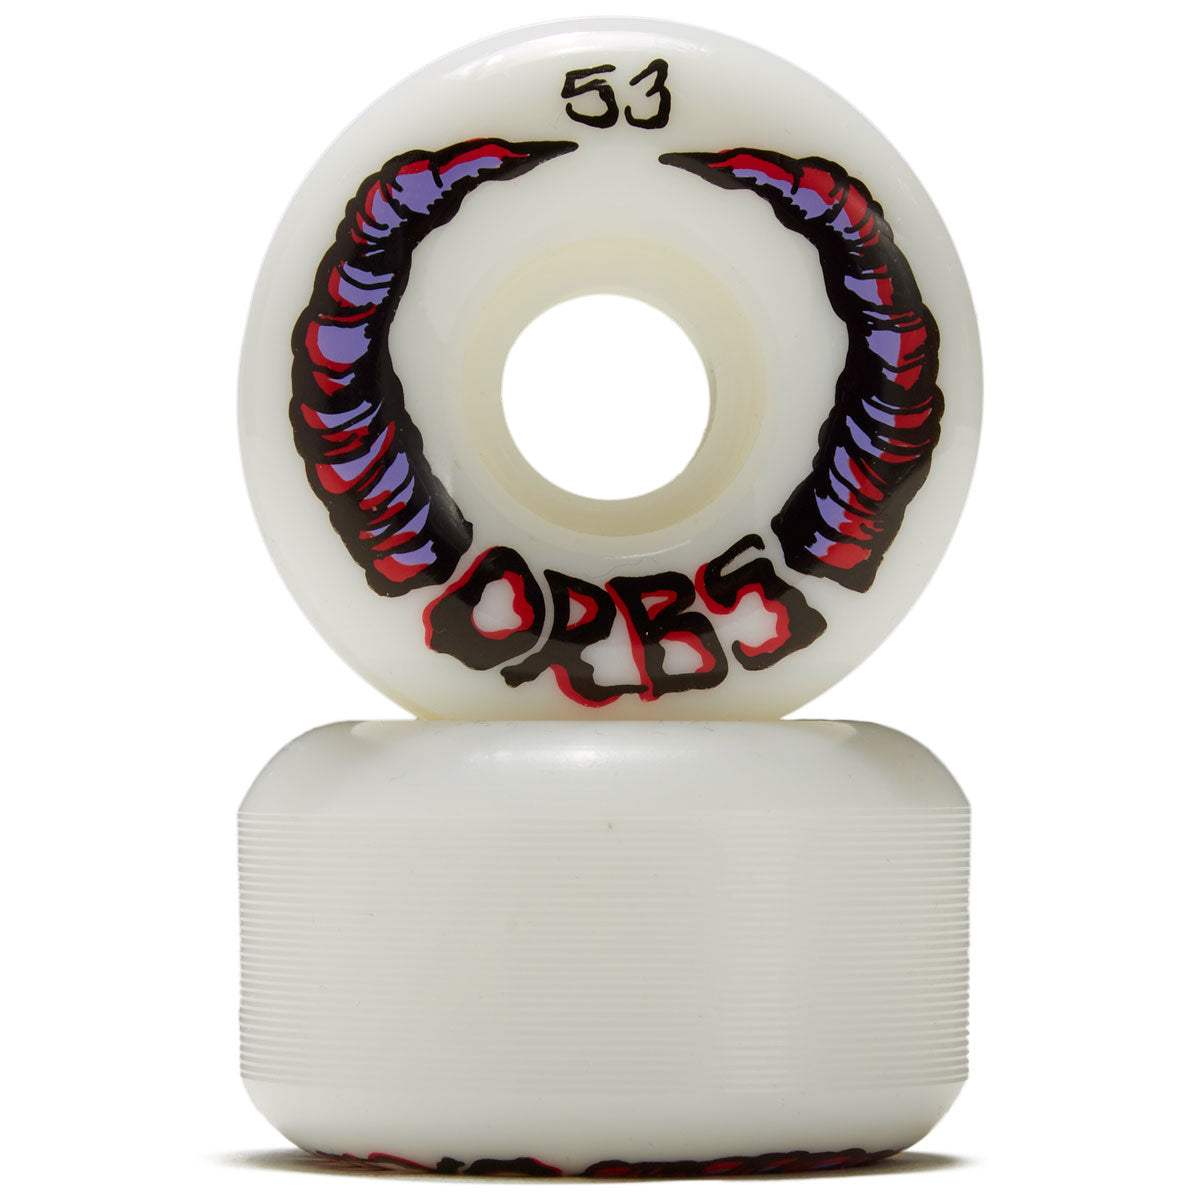 Welcome Orbs Apparitions Round 99A Skateboard Wheels - White - 53mm image 2